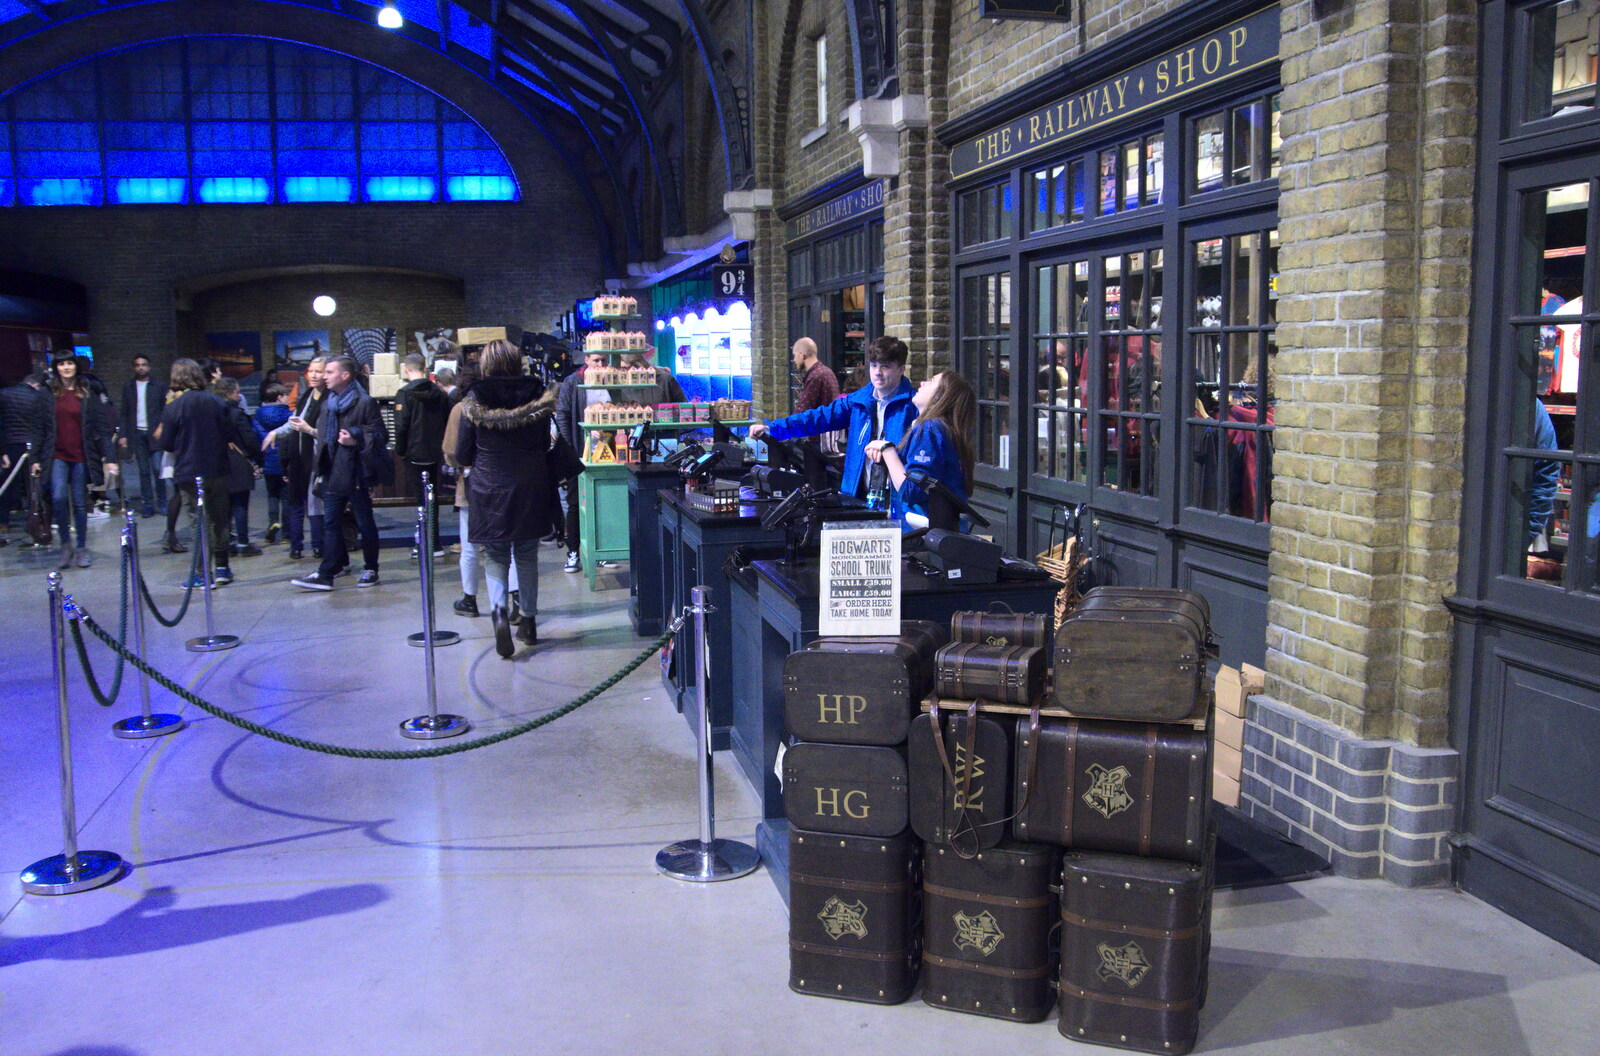 Outside the Railway Shop from A Trip to Harry Potter World, Leavesden, Hertfordshire - 16th February 2020